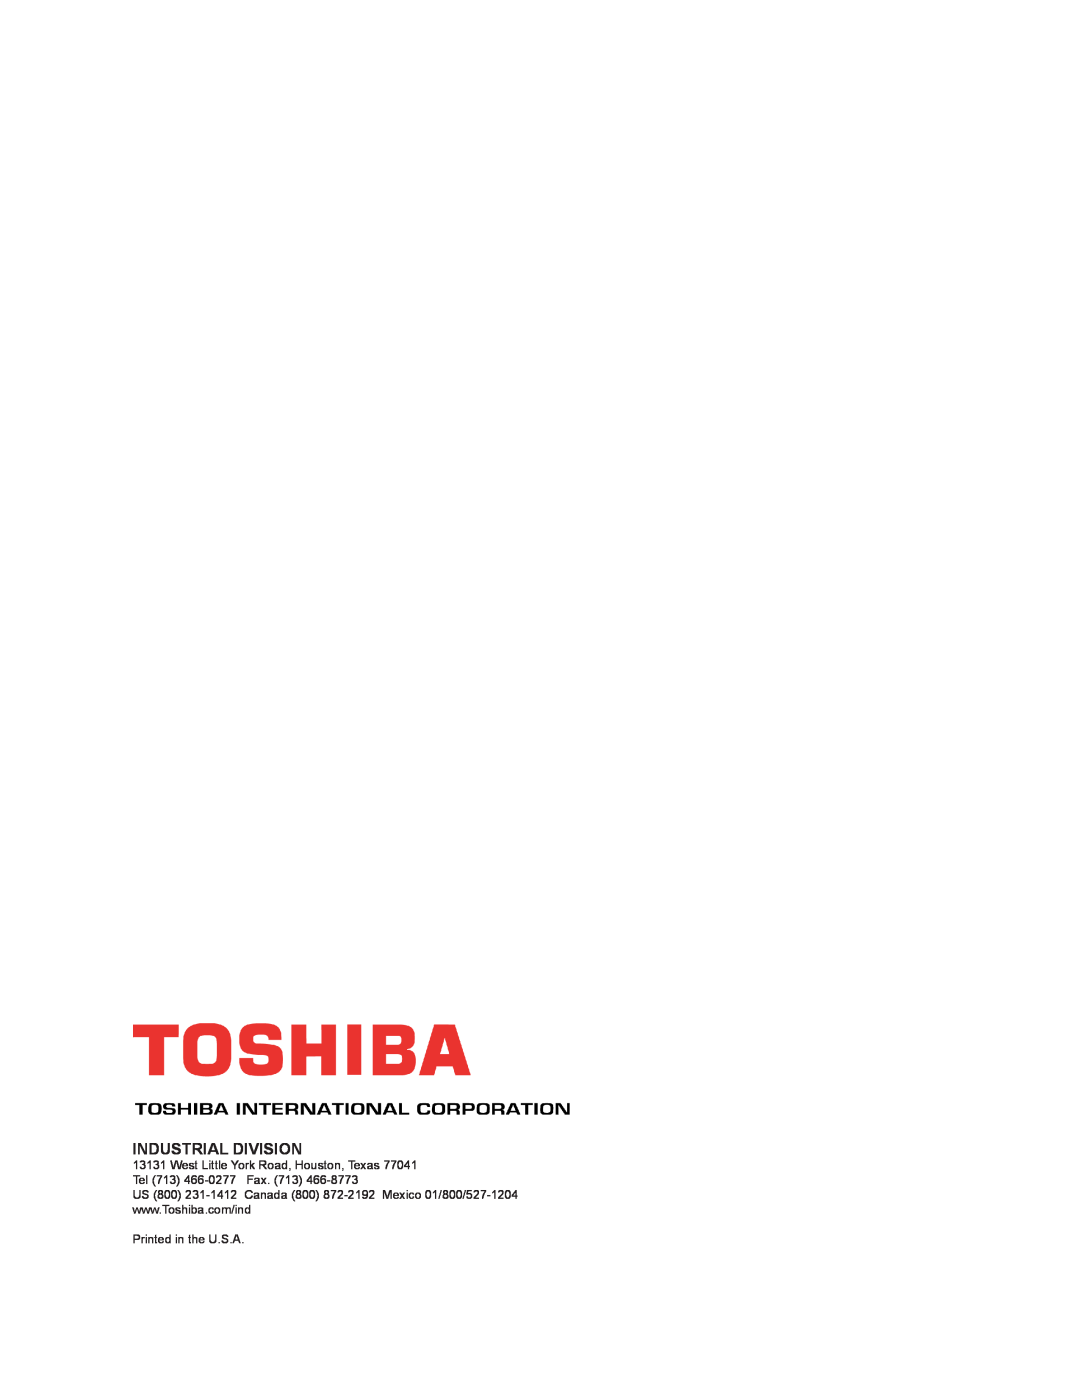 Toshiba 1600EP Series manual Industrial Division, Printed in the U.S.A 